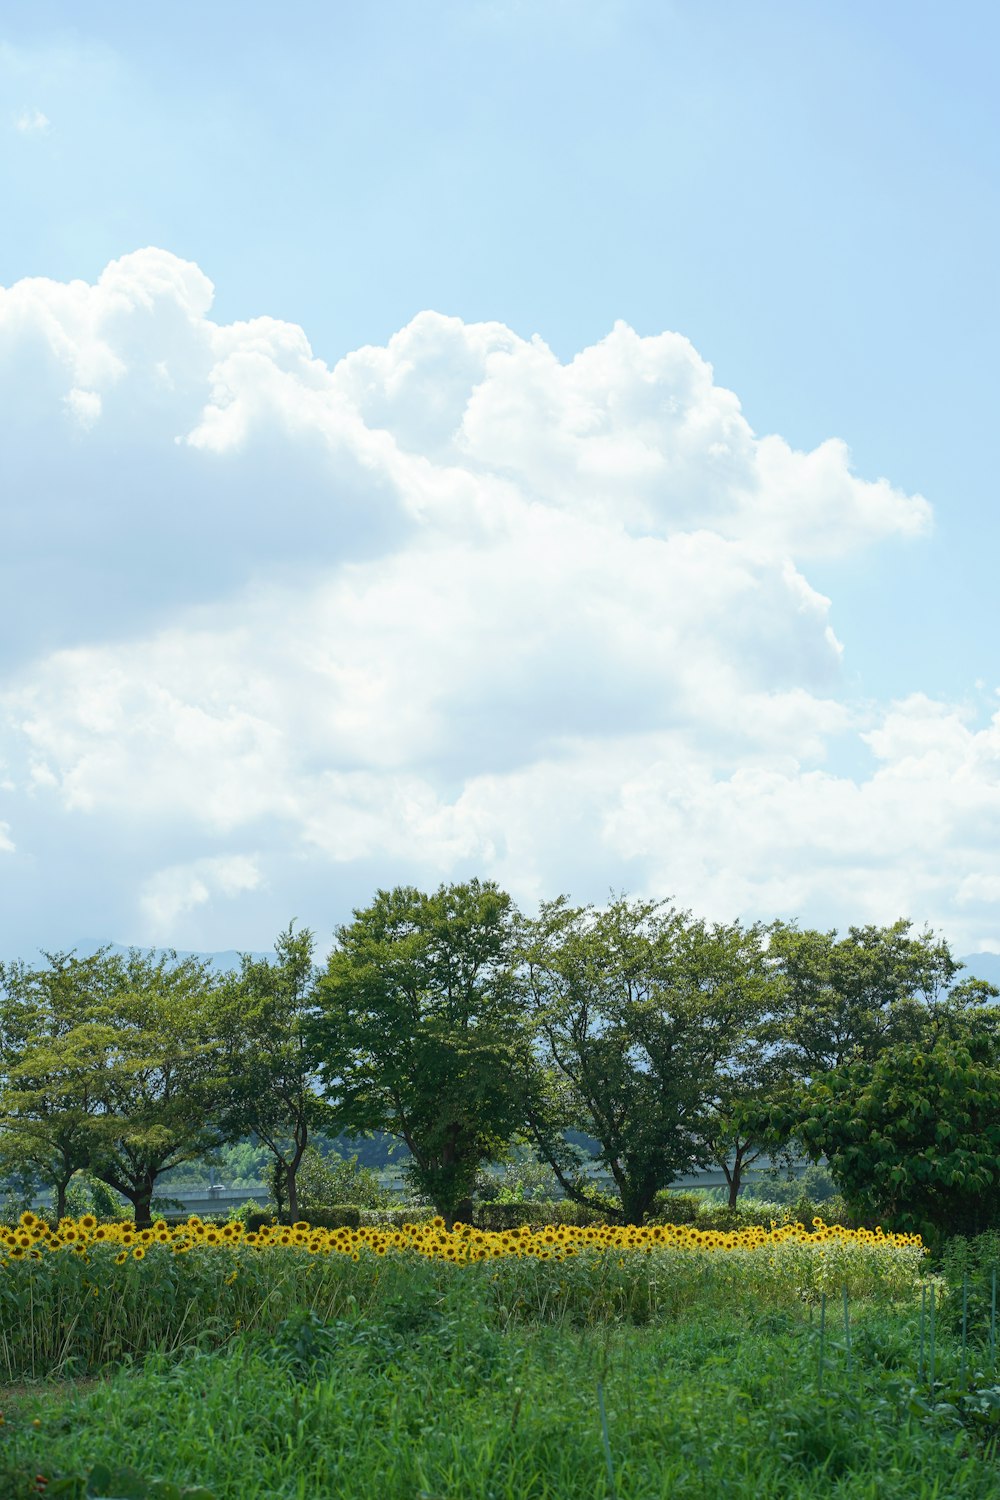 a field of sunflowers and trees under a cloudy blue sky